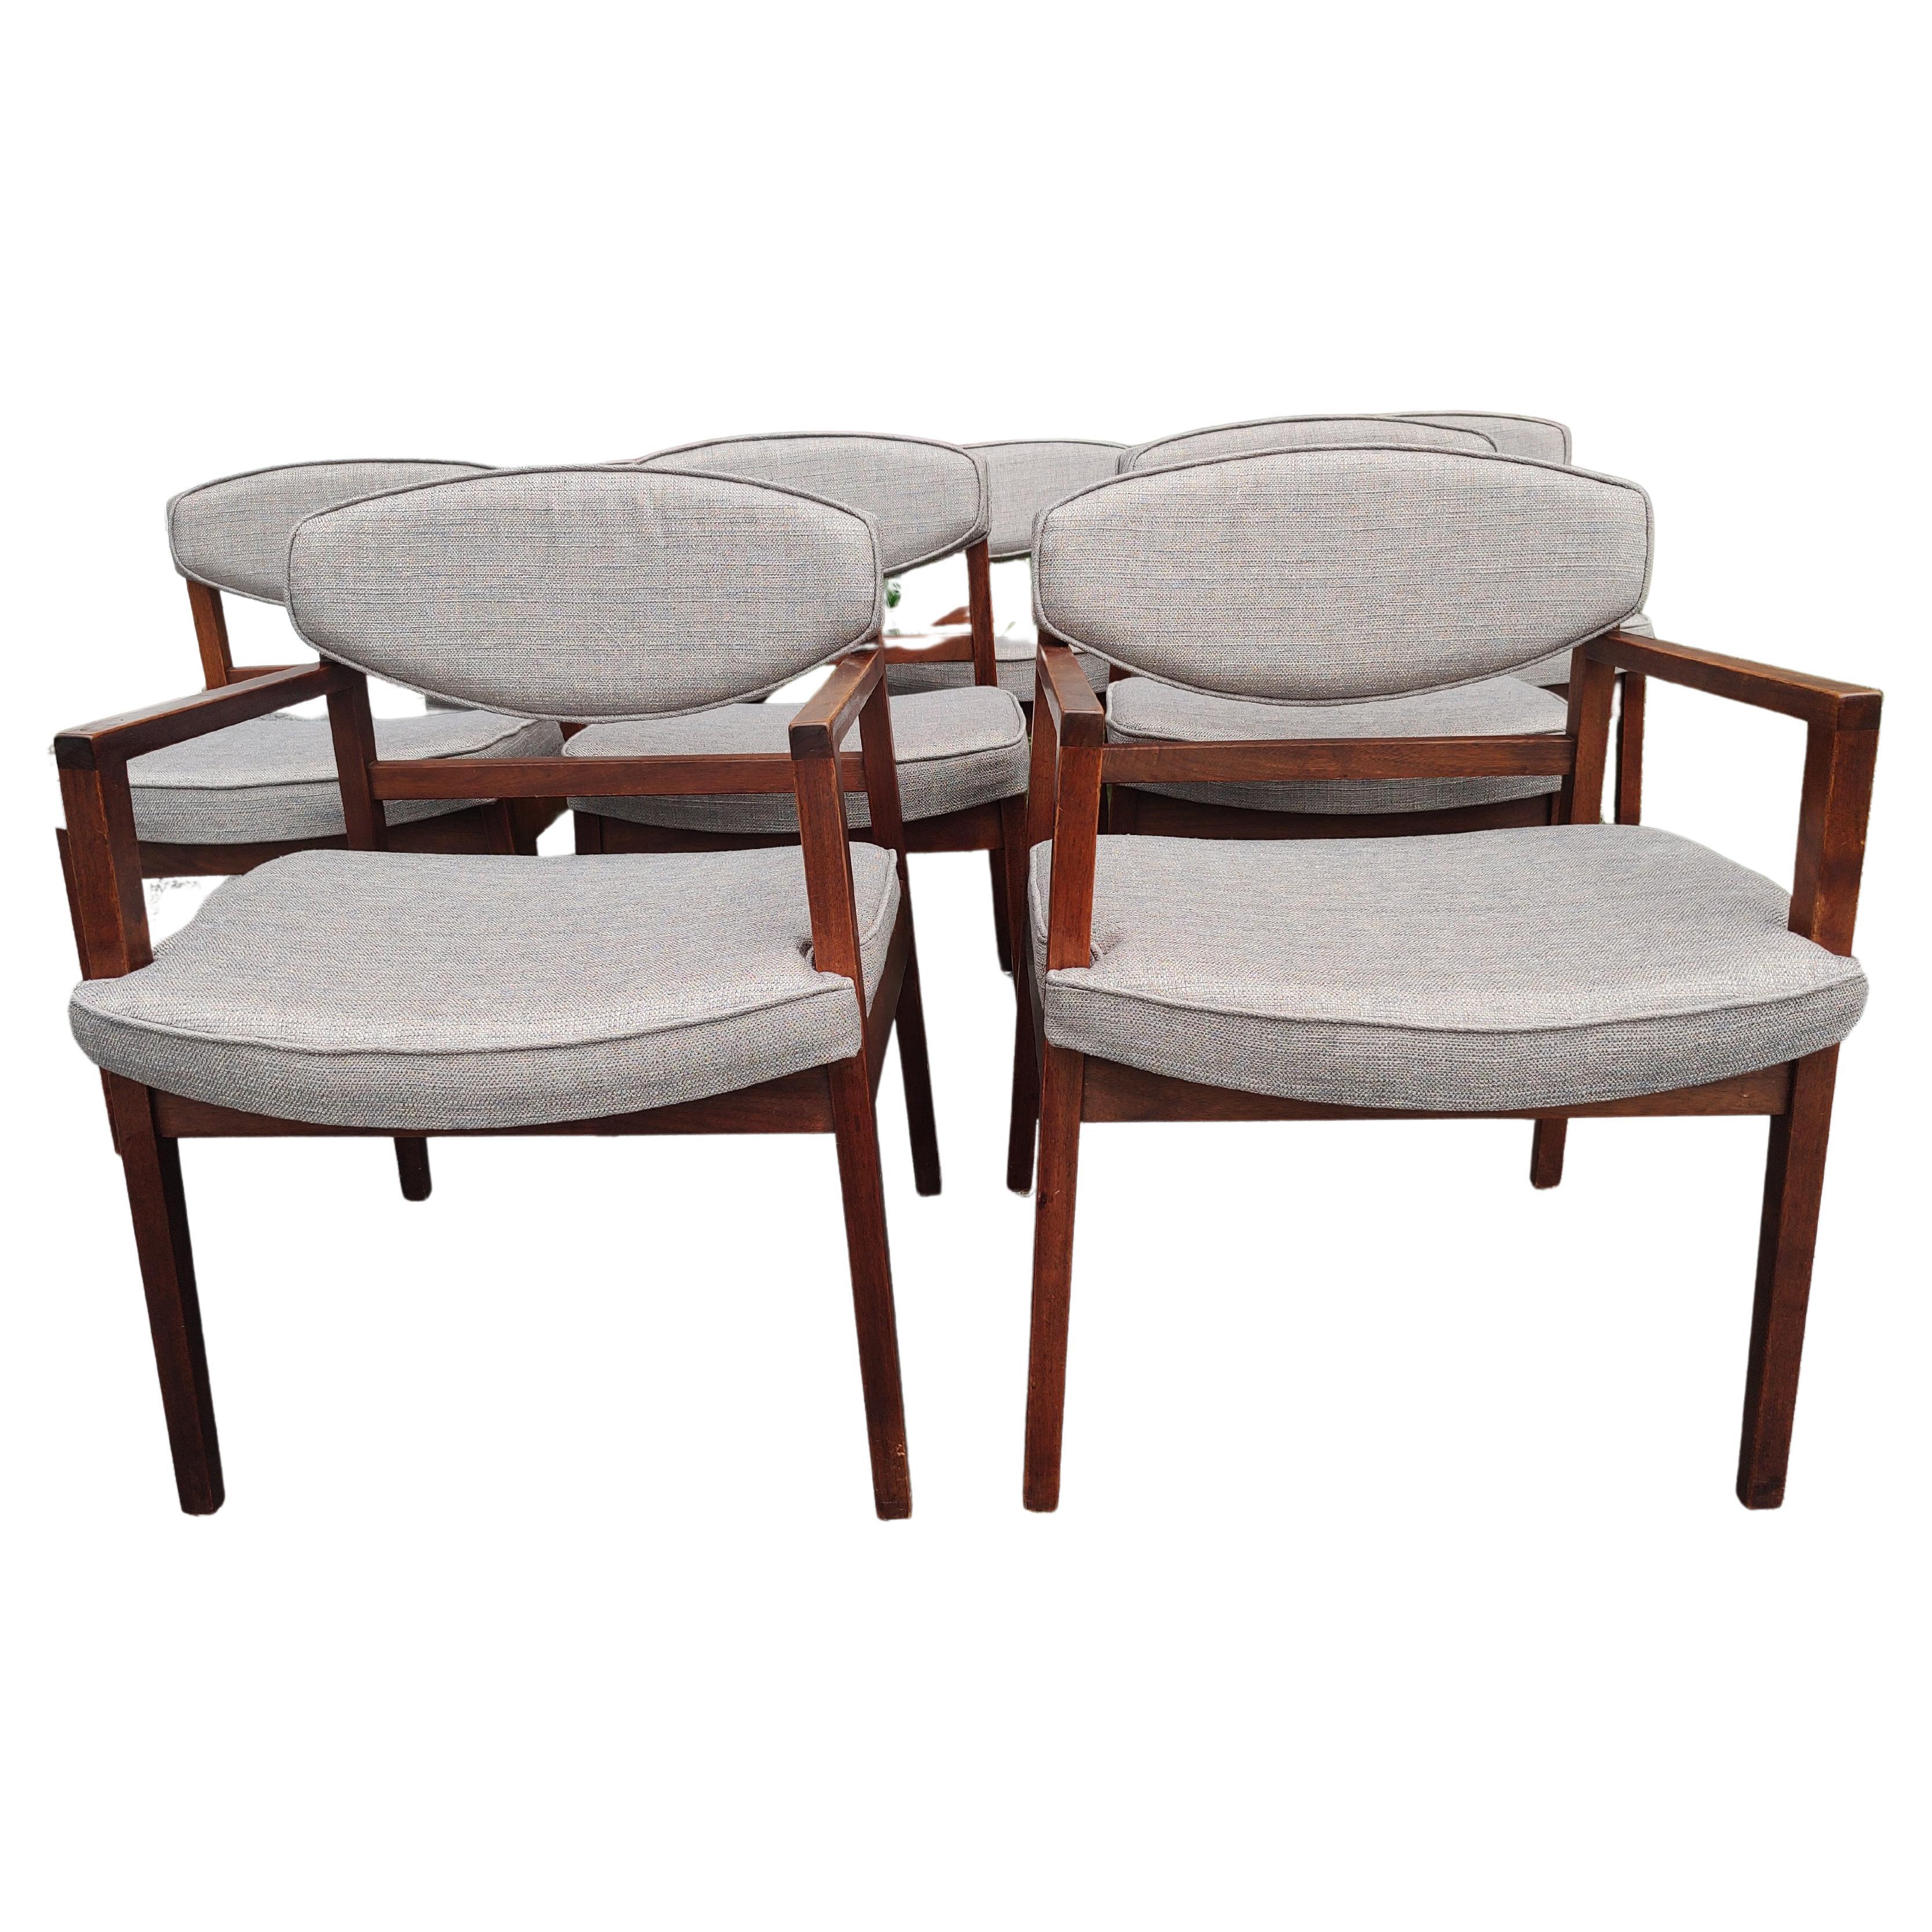 Mid-20th Century Set of 8 Mid Century Modern Teak Dining Chairs by George Nelson - Herman Miller For Sale